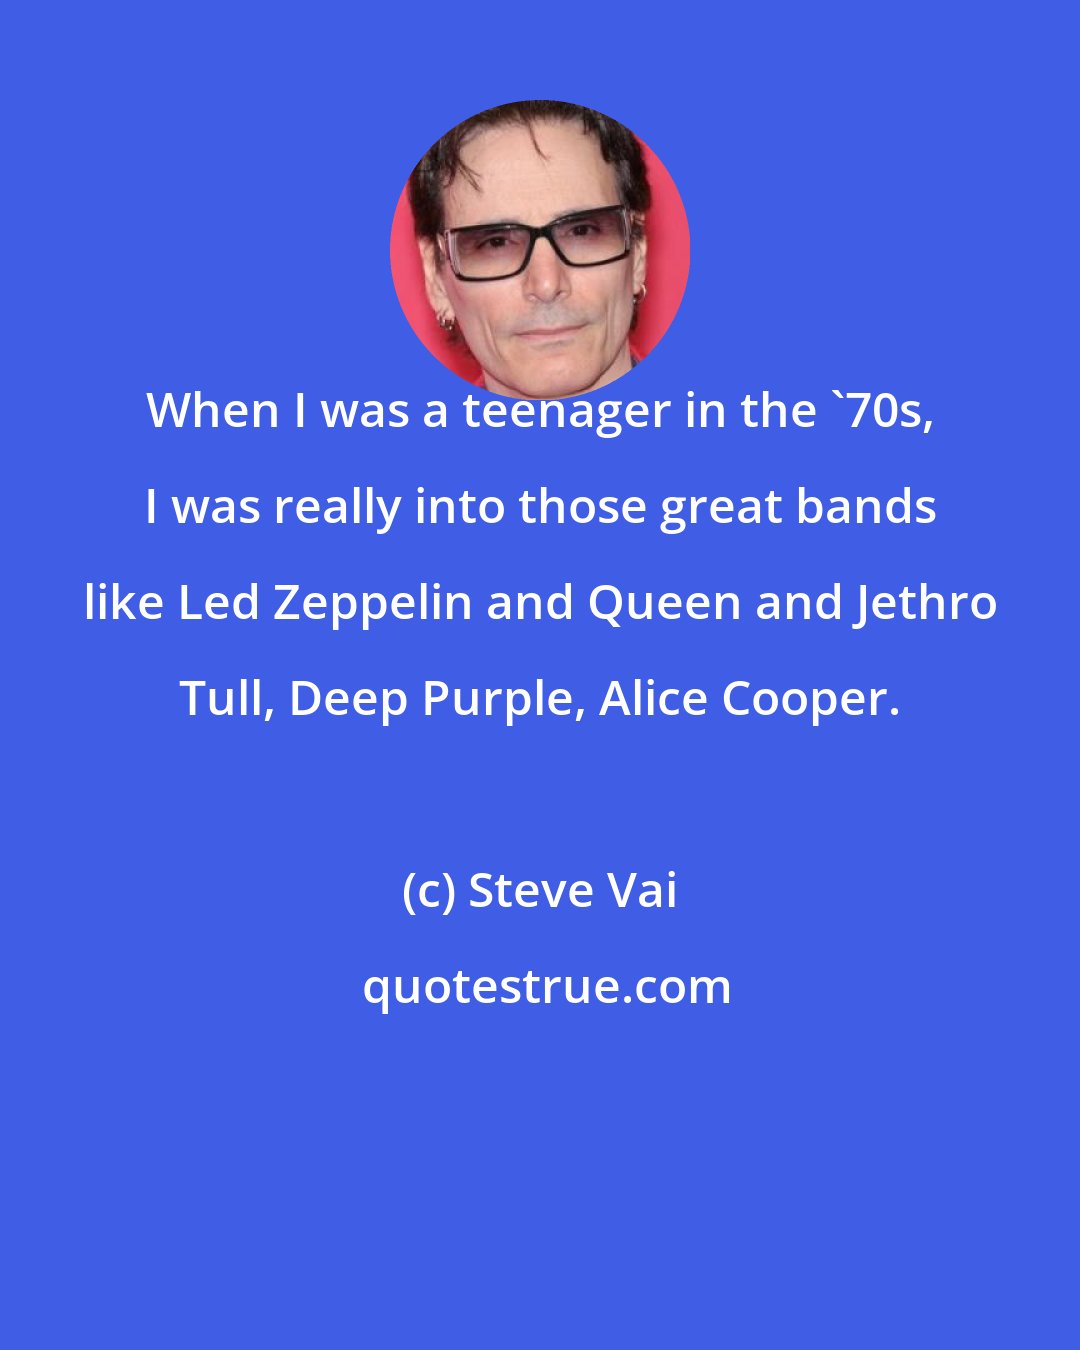 Steve Vai: When I was a teenager in the '70s, I was really into those great bands like Led Zeppelin and Queen and Jethro Tull, Deep Purple, Alice Cooper.